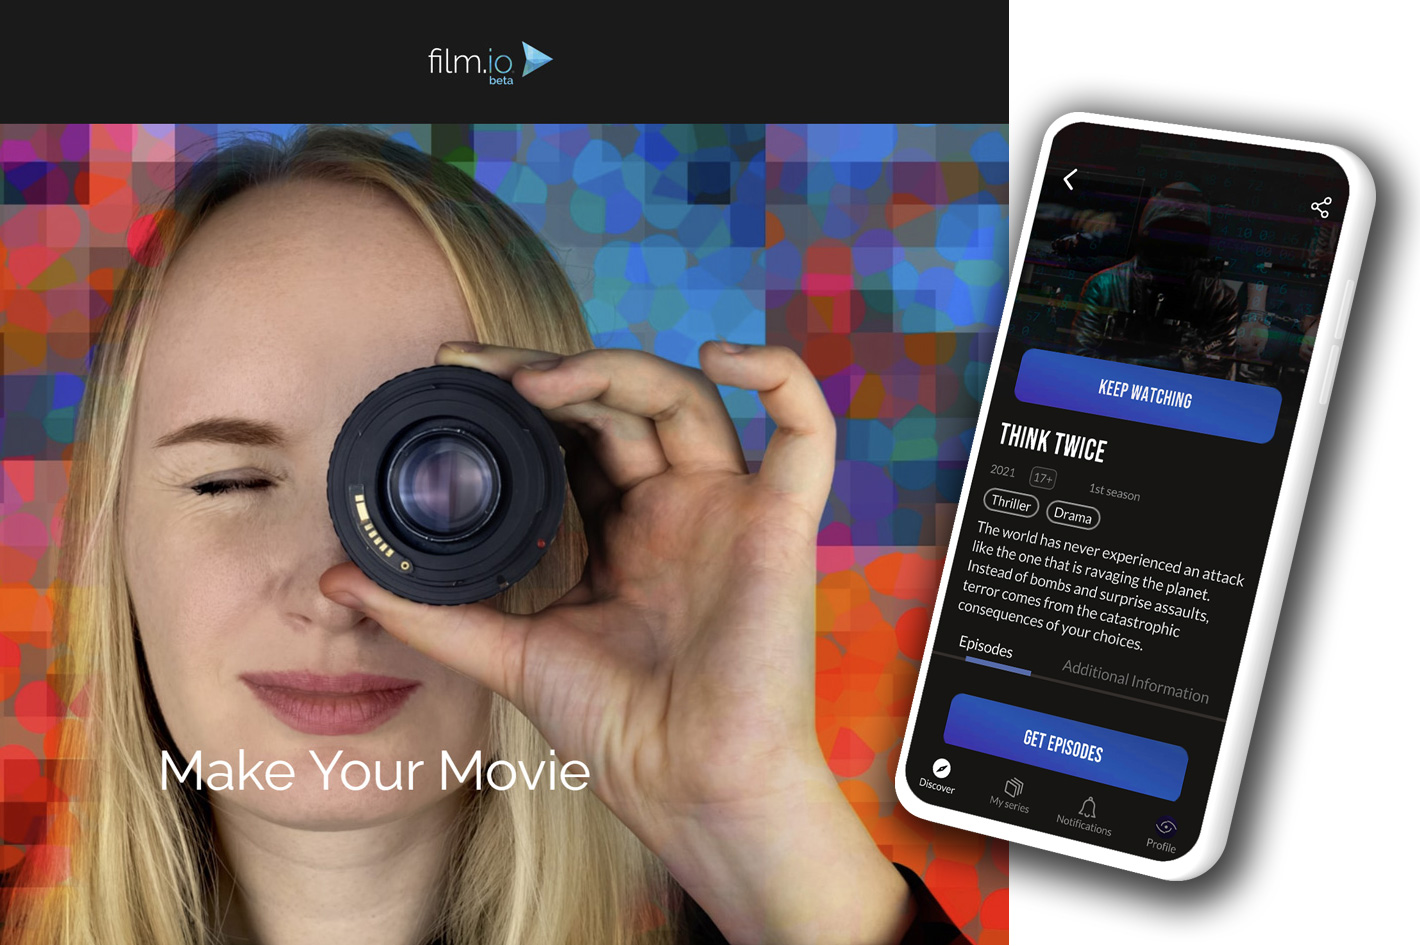 Film.io and Serialify aim to democratize the film industry by Jose Antunes